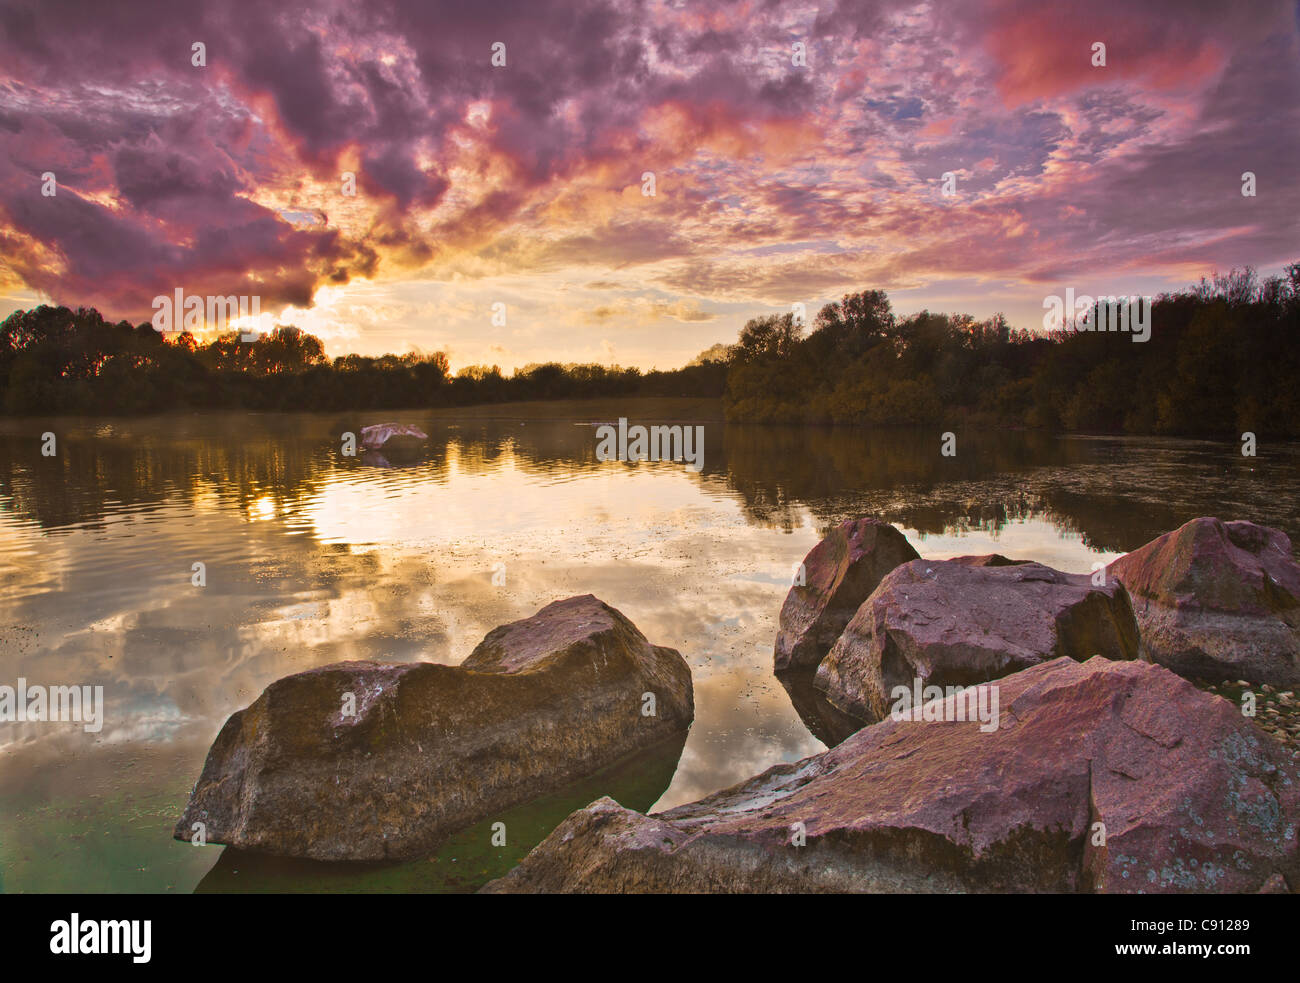 An autumn sunset over the lake at Colwick Country Park, Nottingham, Nottinghamshire, England, UK Stock Photo